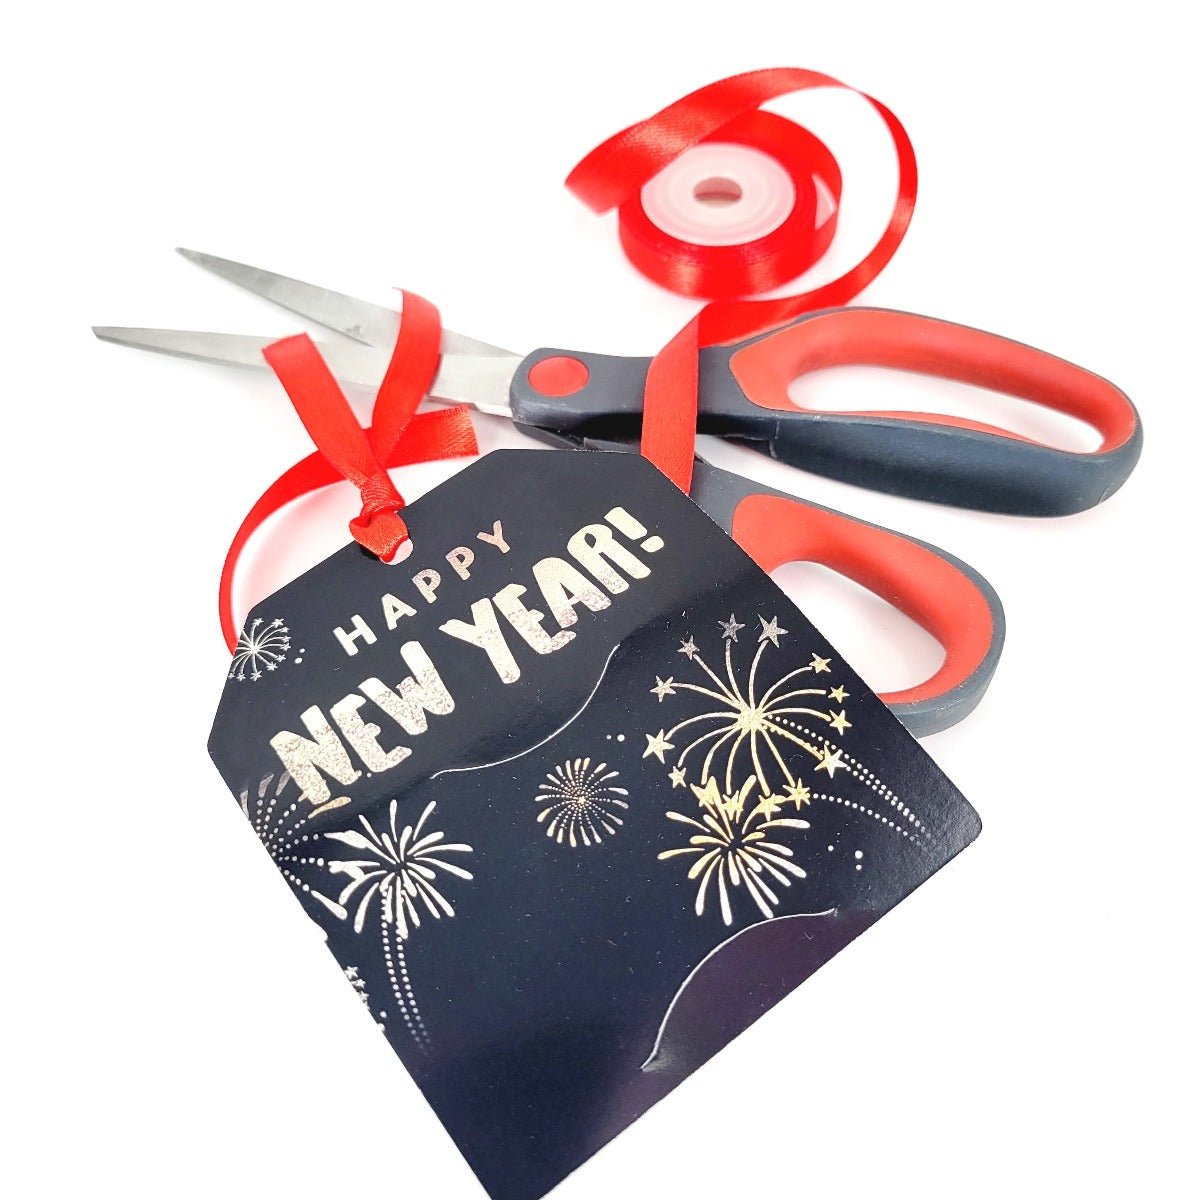 Pop-By Gift Tags - Happy New Year! - All Things Real Estate